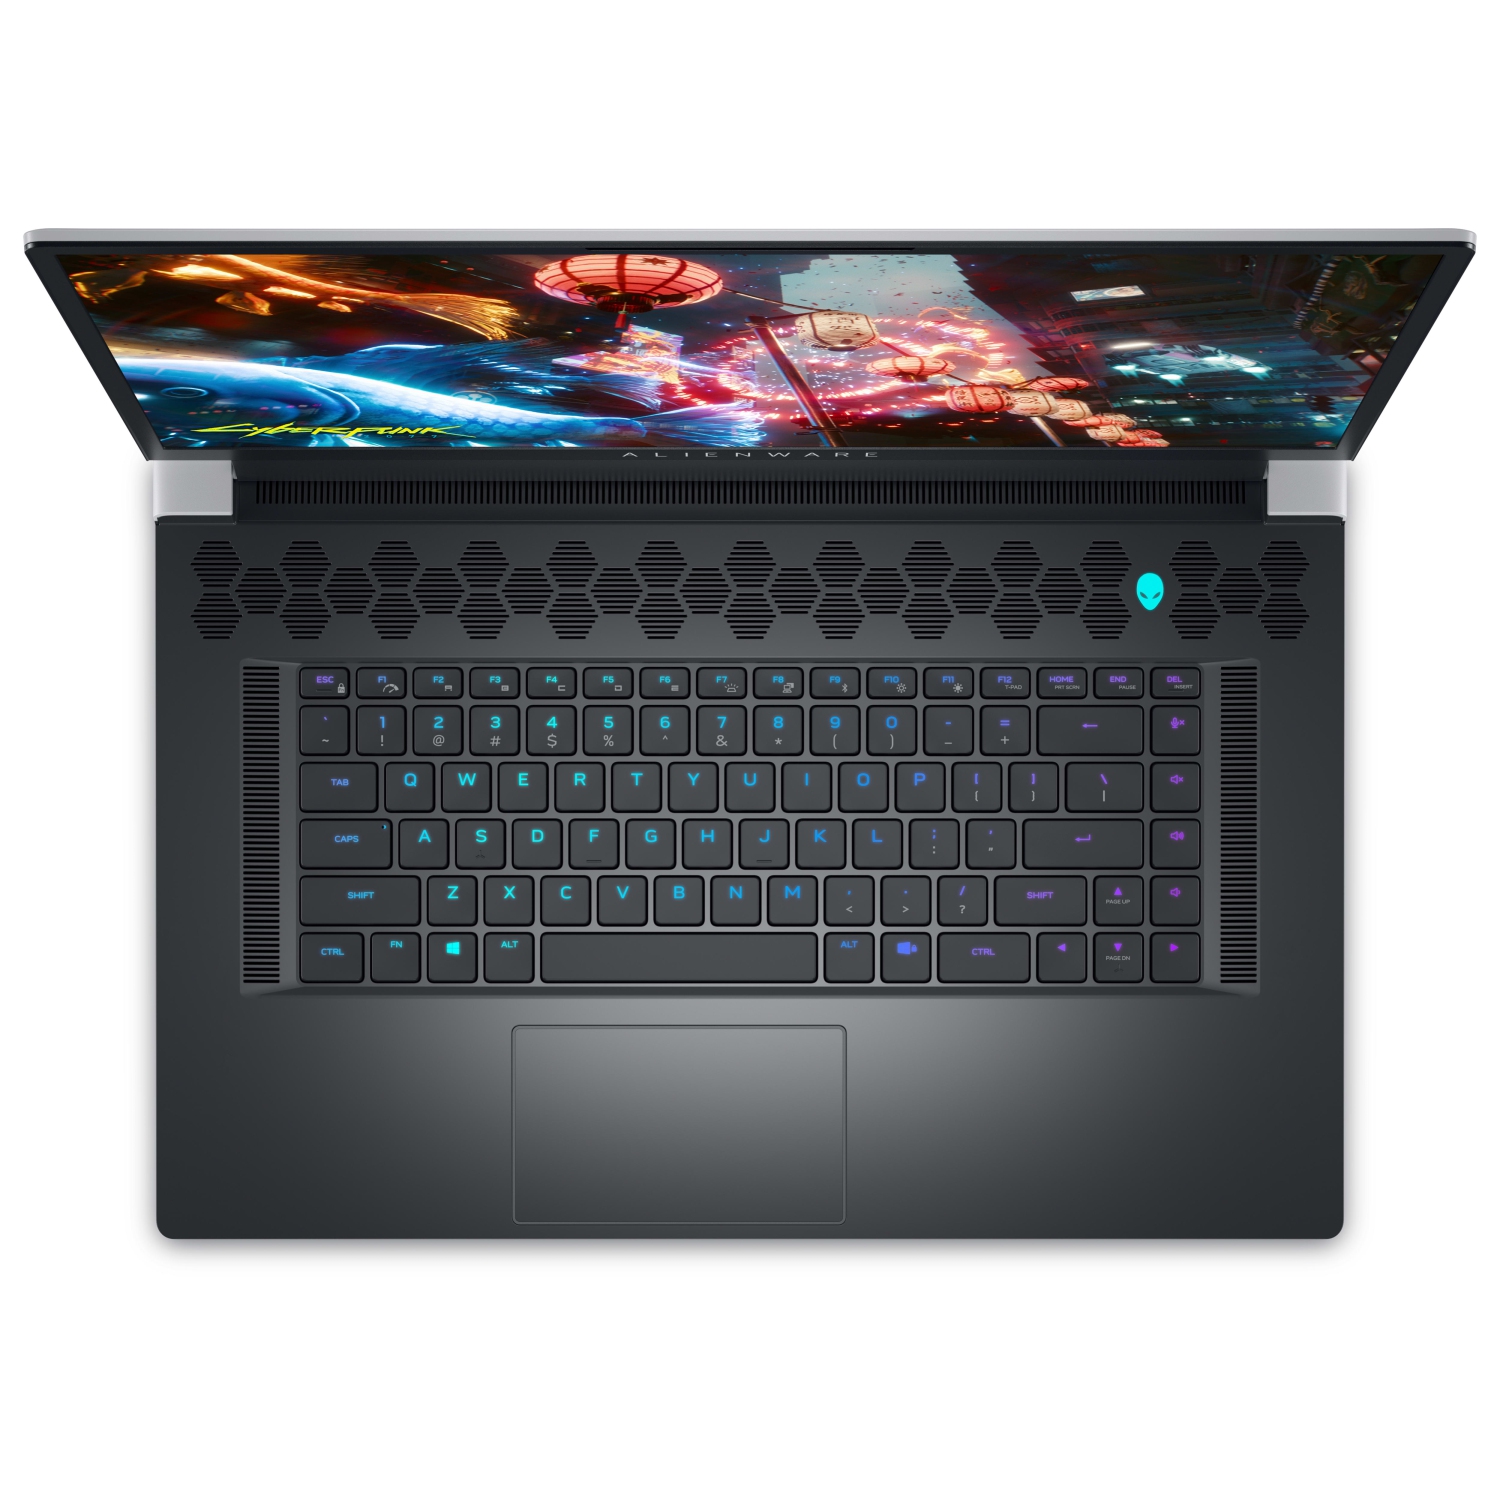 Refurbished (Excellent) – Dell Alienware X17 R2 Gaming Laptop (2022) | 17.3" QHD | Core i7 - 512GB SSD - 16GB RAM - RTX 3060 | 14 Cores @ 4.7 GHz - 12th Gen CPU - 6GB GDDR6